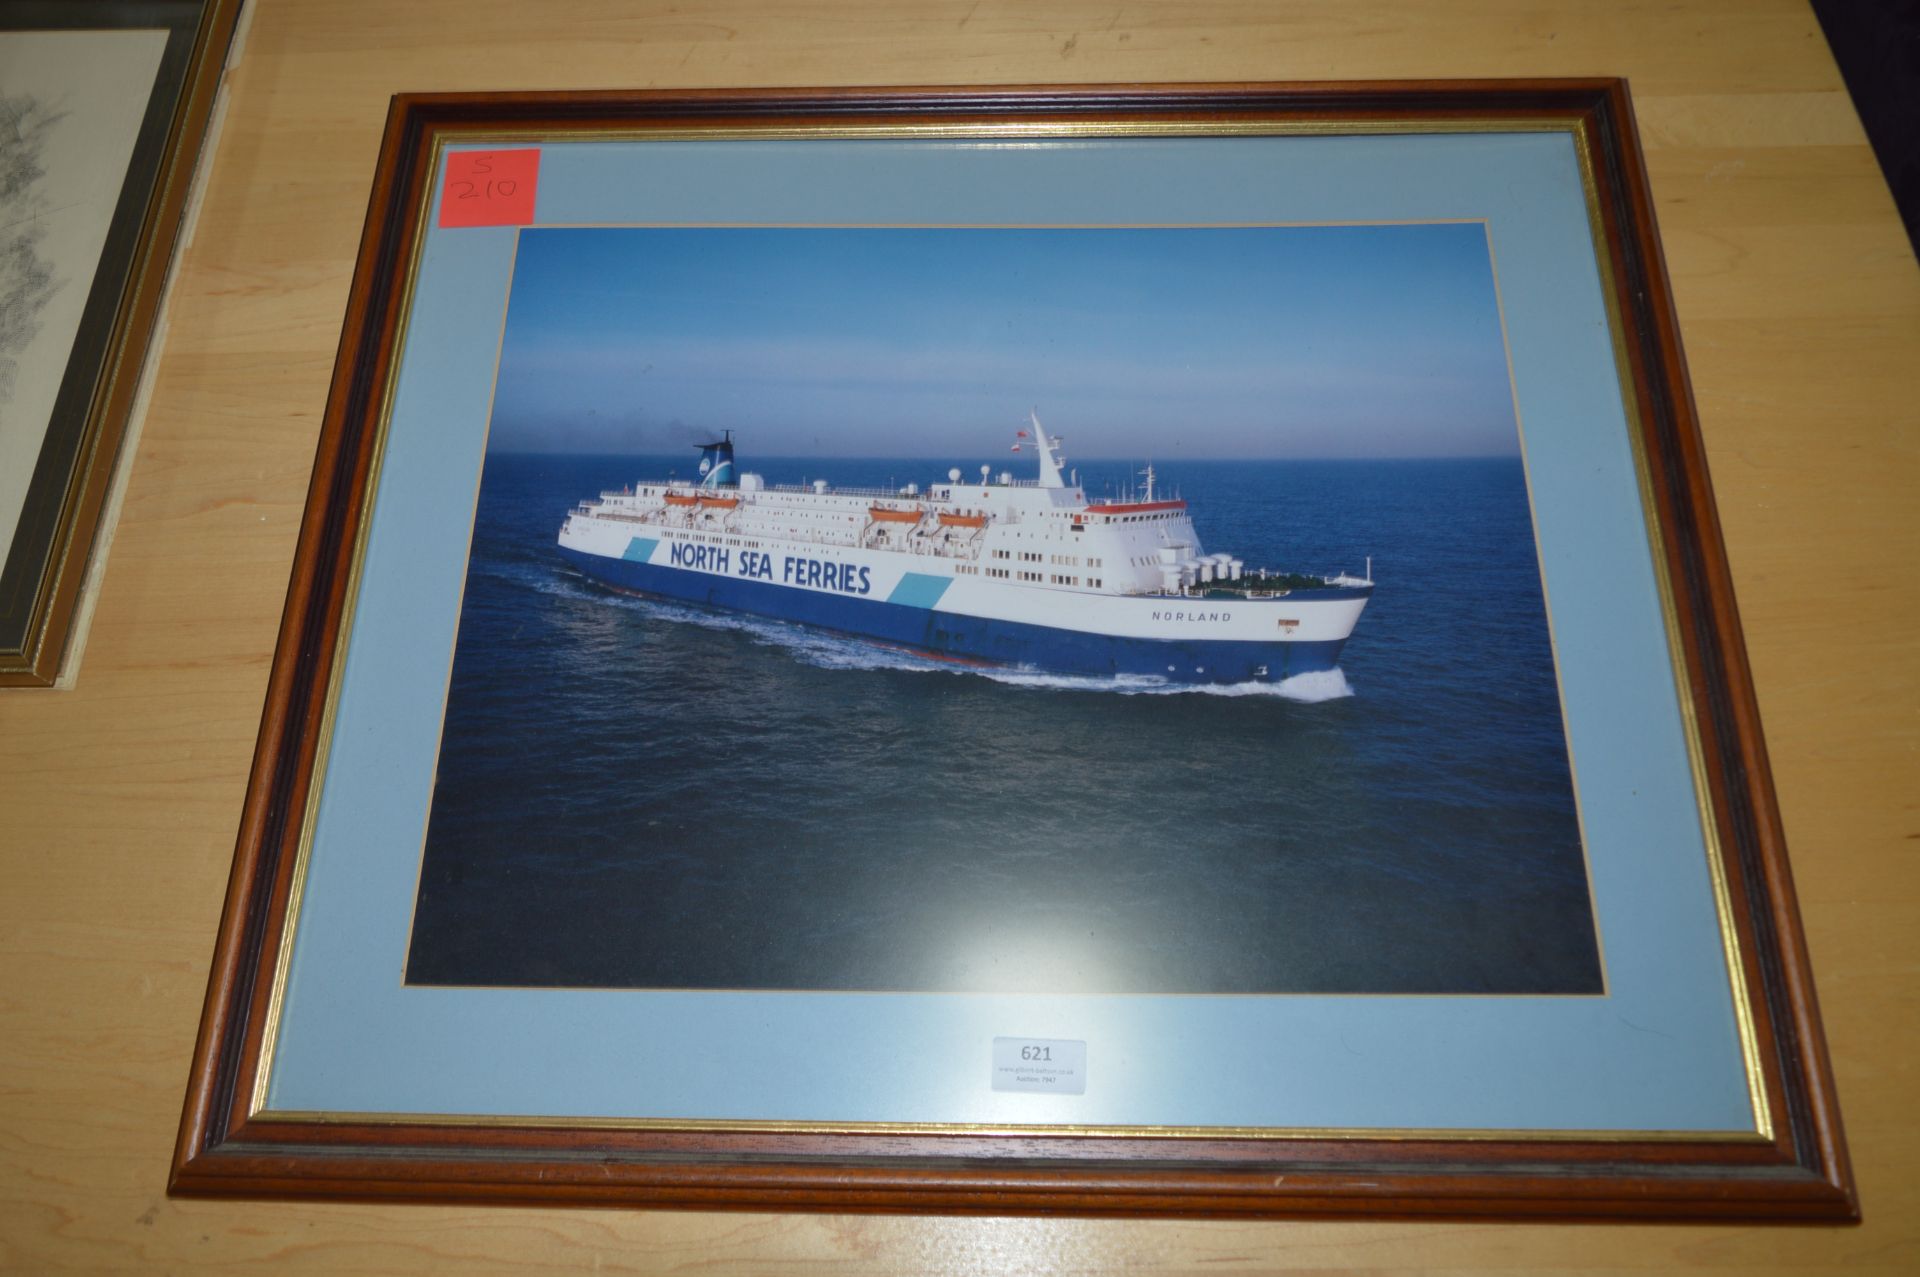 Large Framed Photo - North Sea Ferry Norland